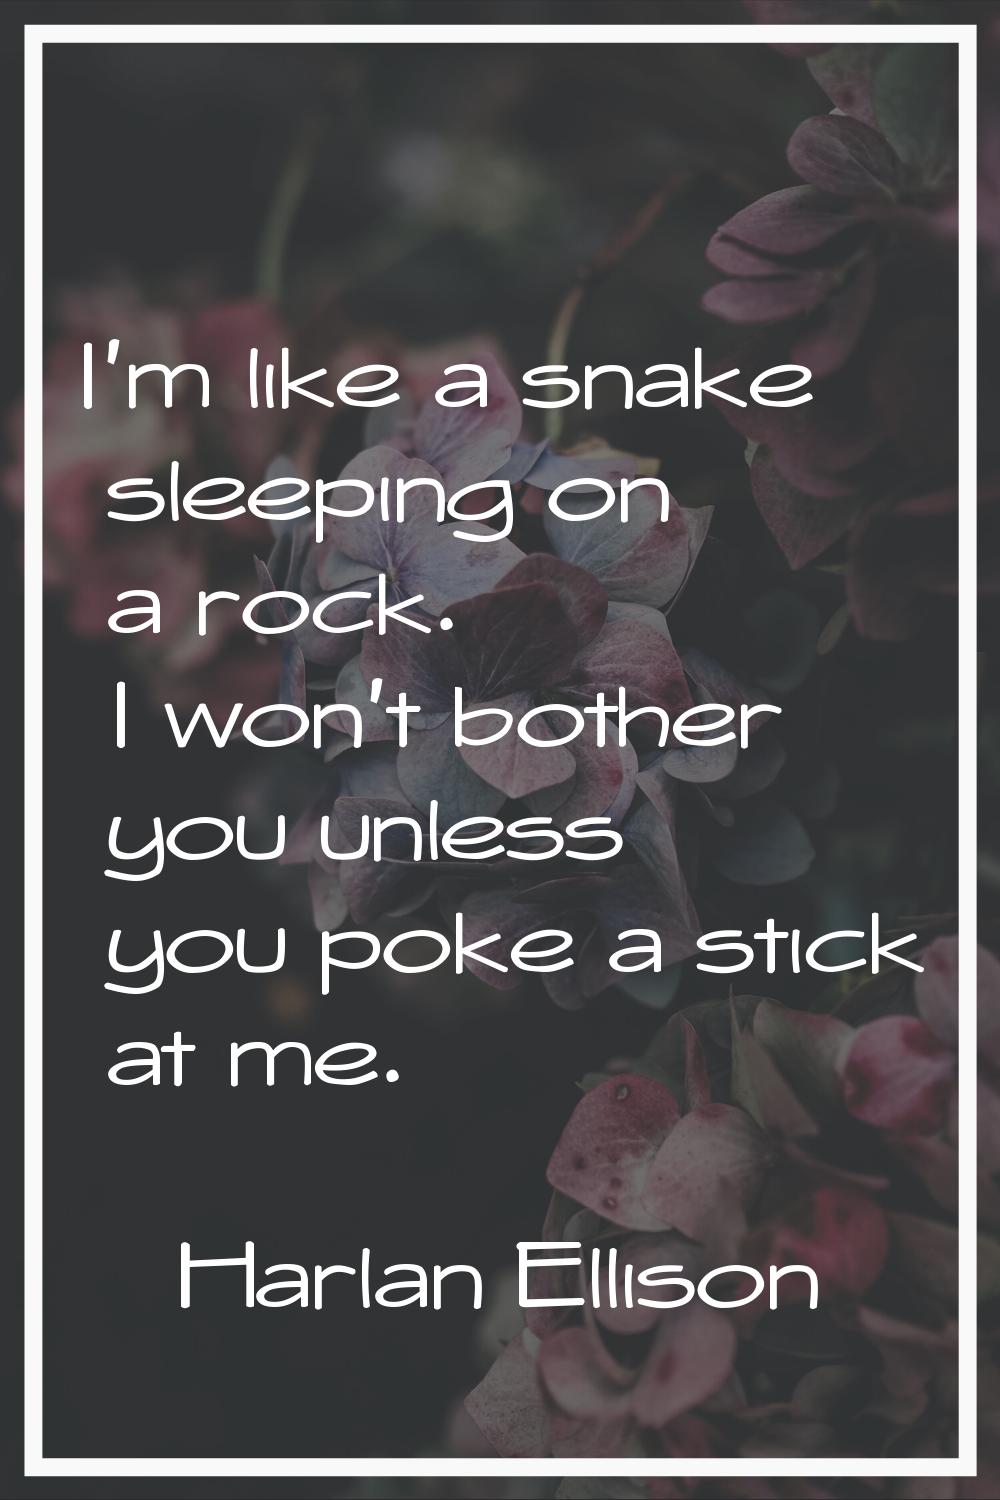 I'm like a snake sleeping on a rock. I won't bother you unless you poke a stick at me.